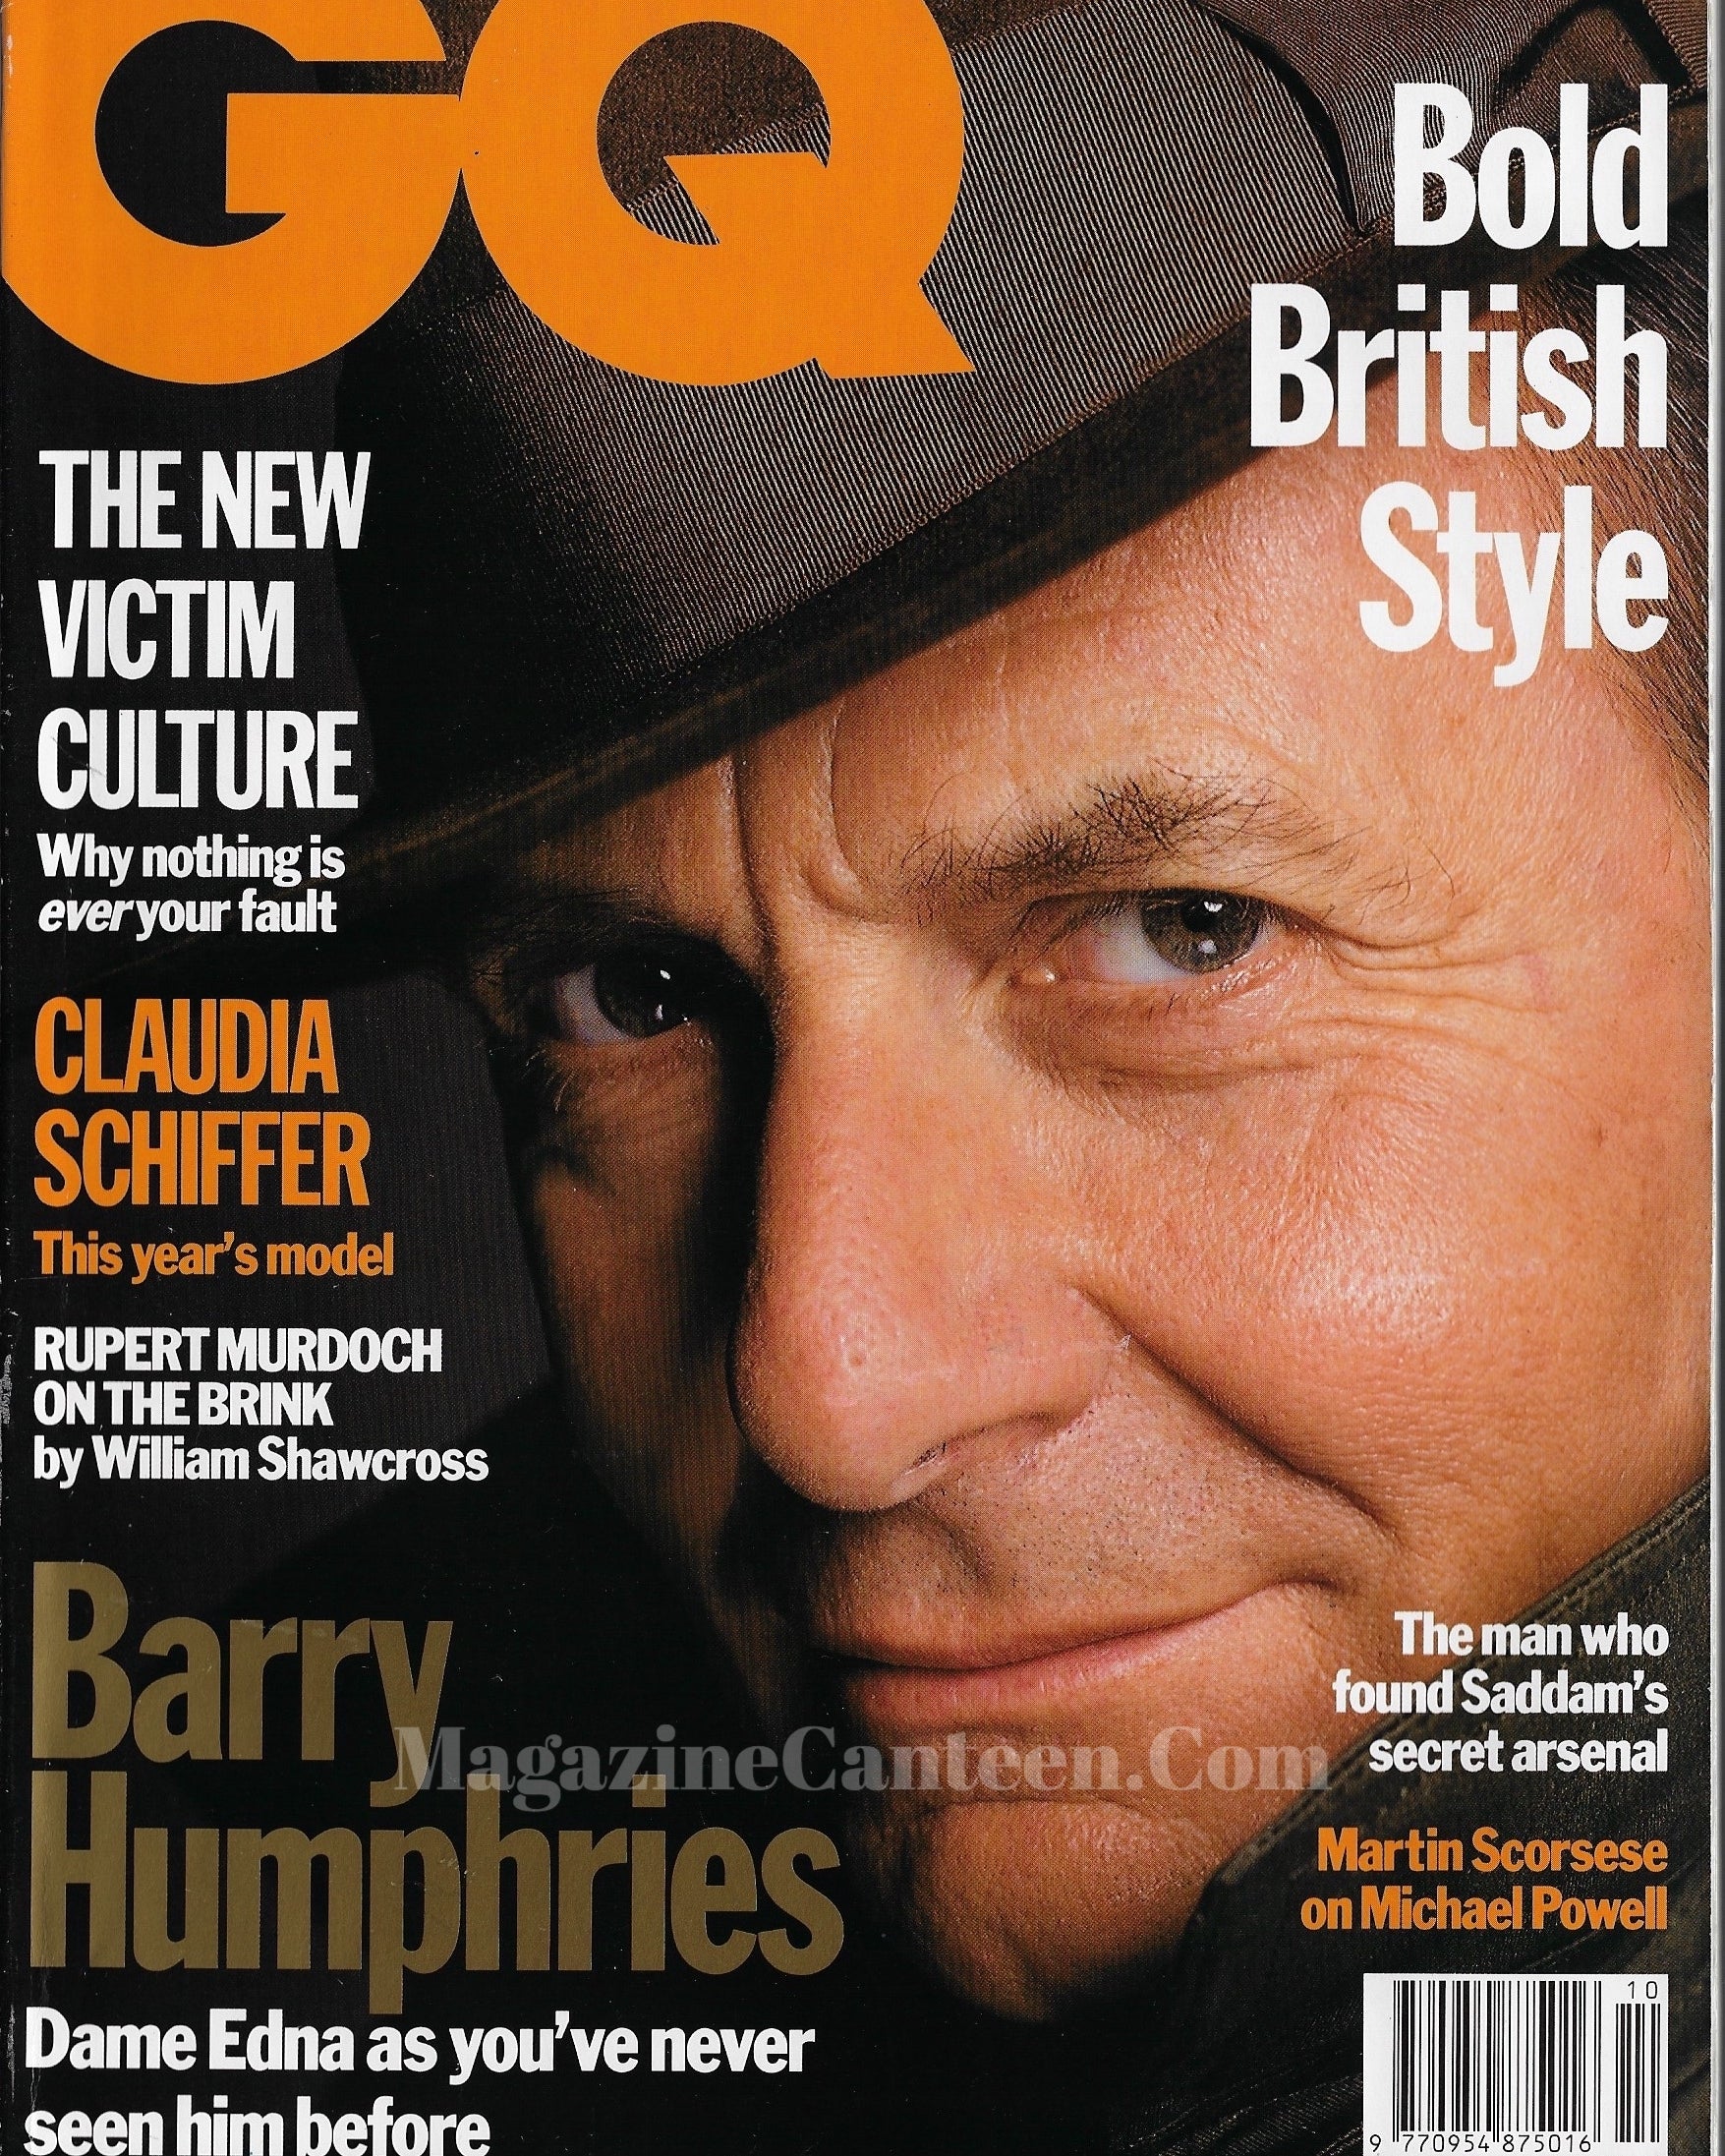 GQ Magazine October 1992 - Barry Humphries